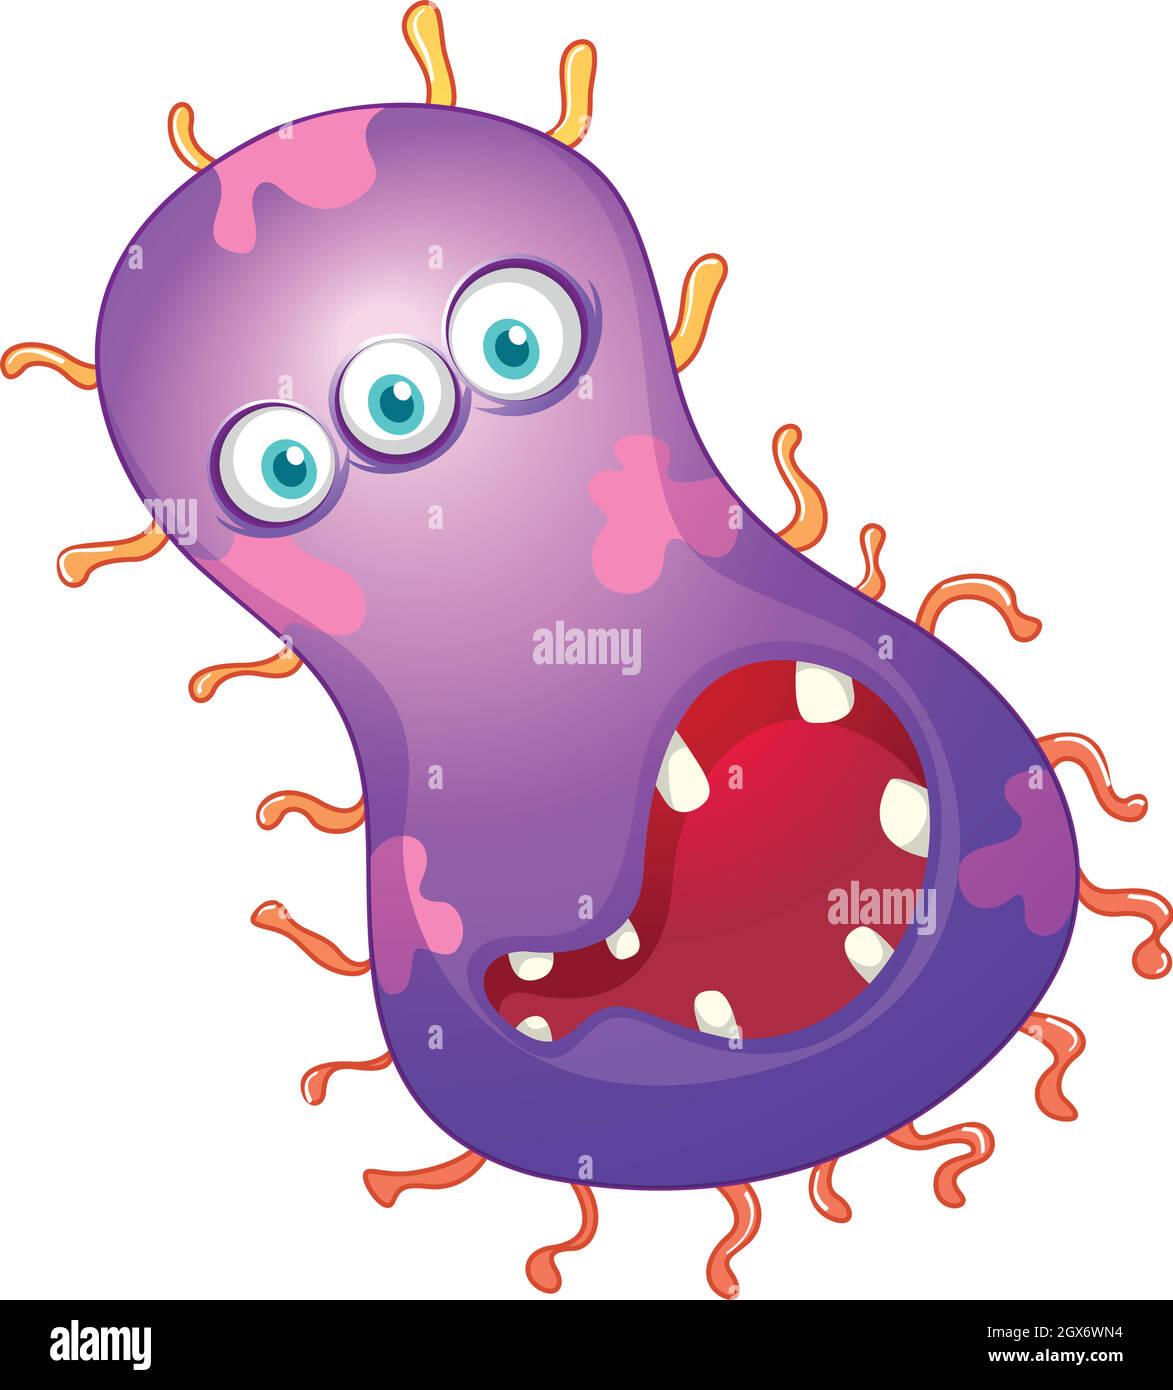 Purple bacteria with face Stock Vector